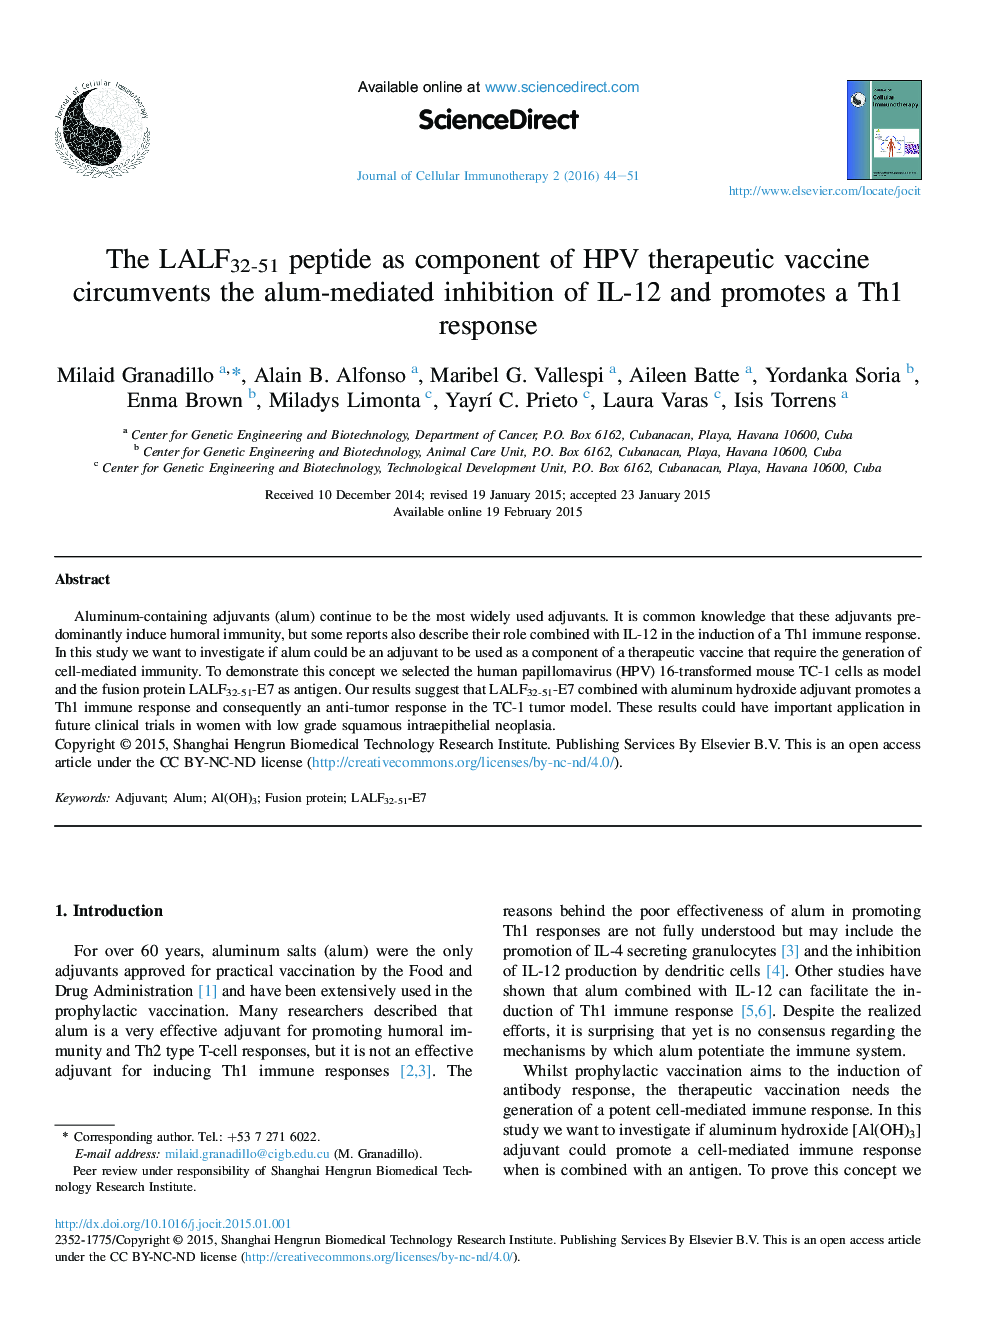 The LALF32-51 peptide as component of HPV therapeutic vaccine circumvents the alum-mediated inhibition of IL-12 and promotes a Th1 response 